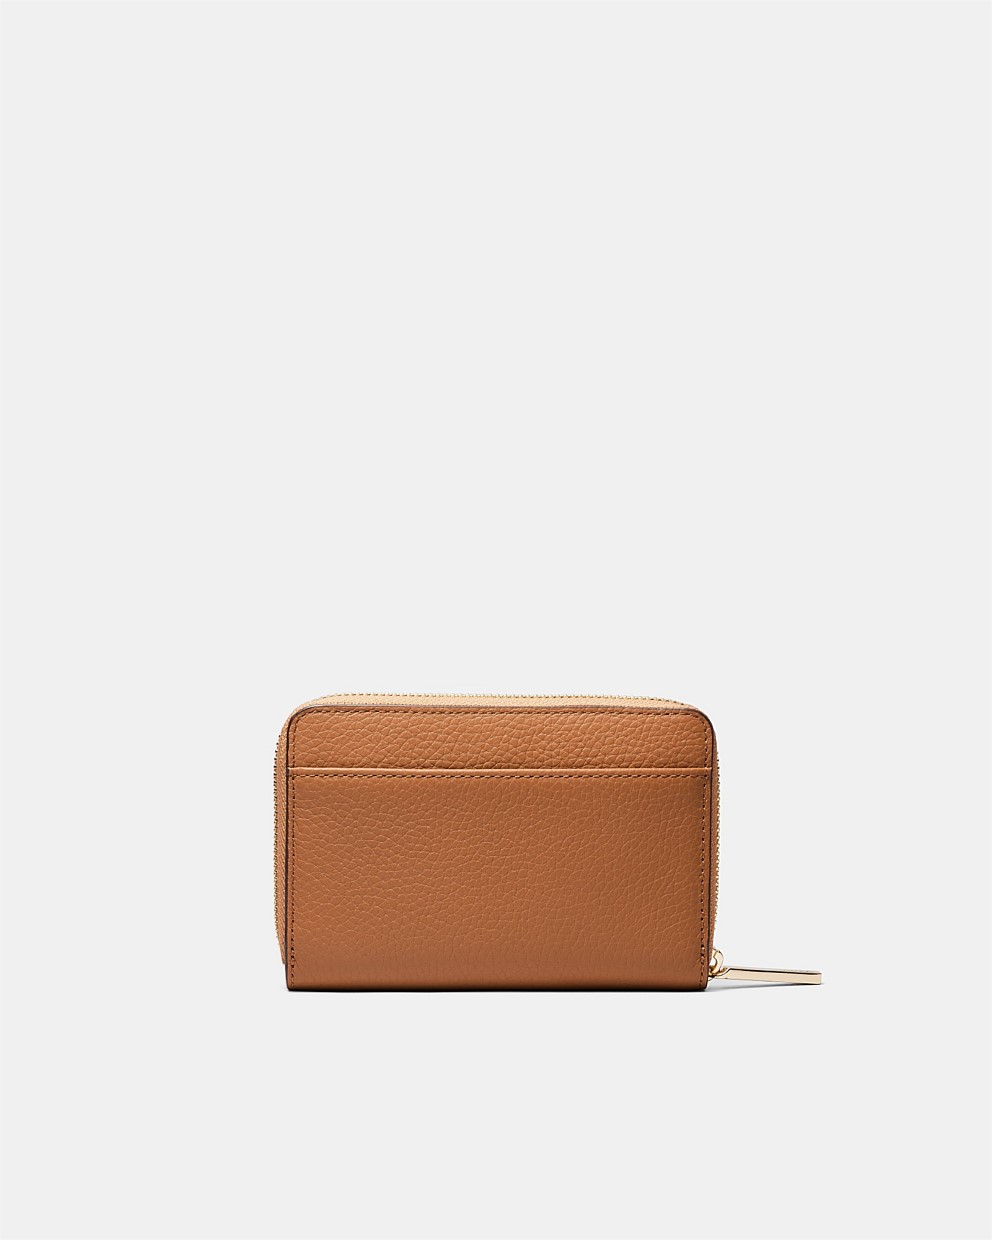 Caramel Patch Leather Medium Wallet - Wallets & Pouches | Mimco